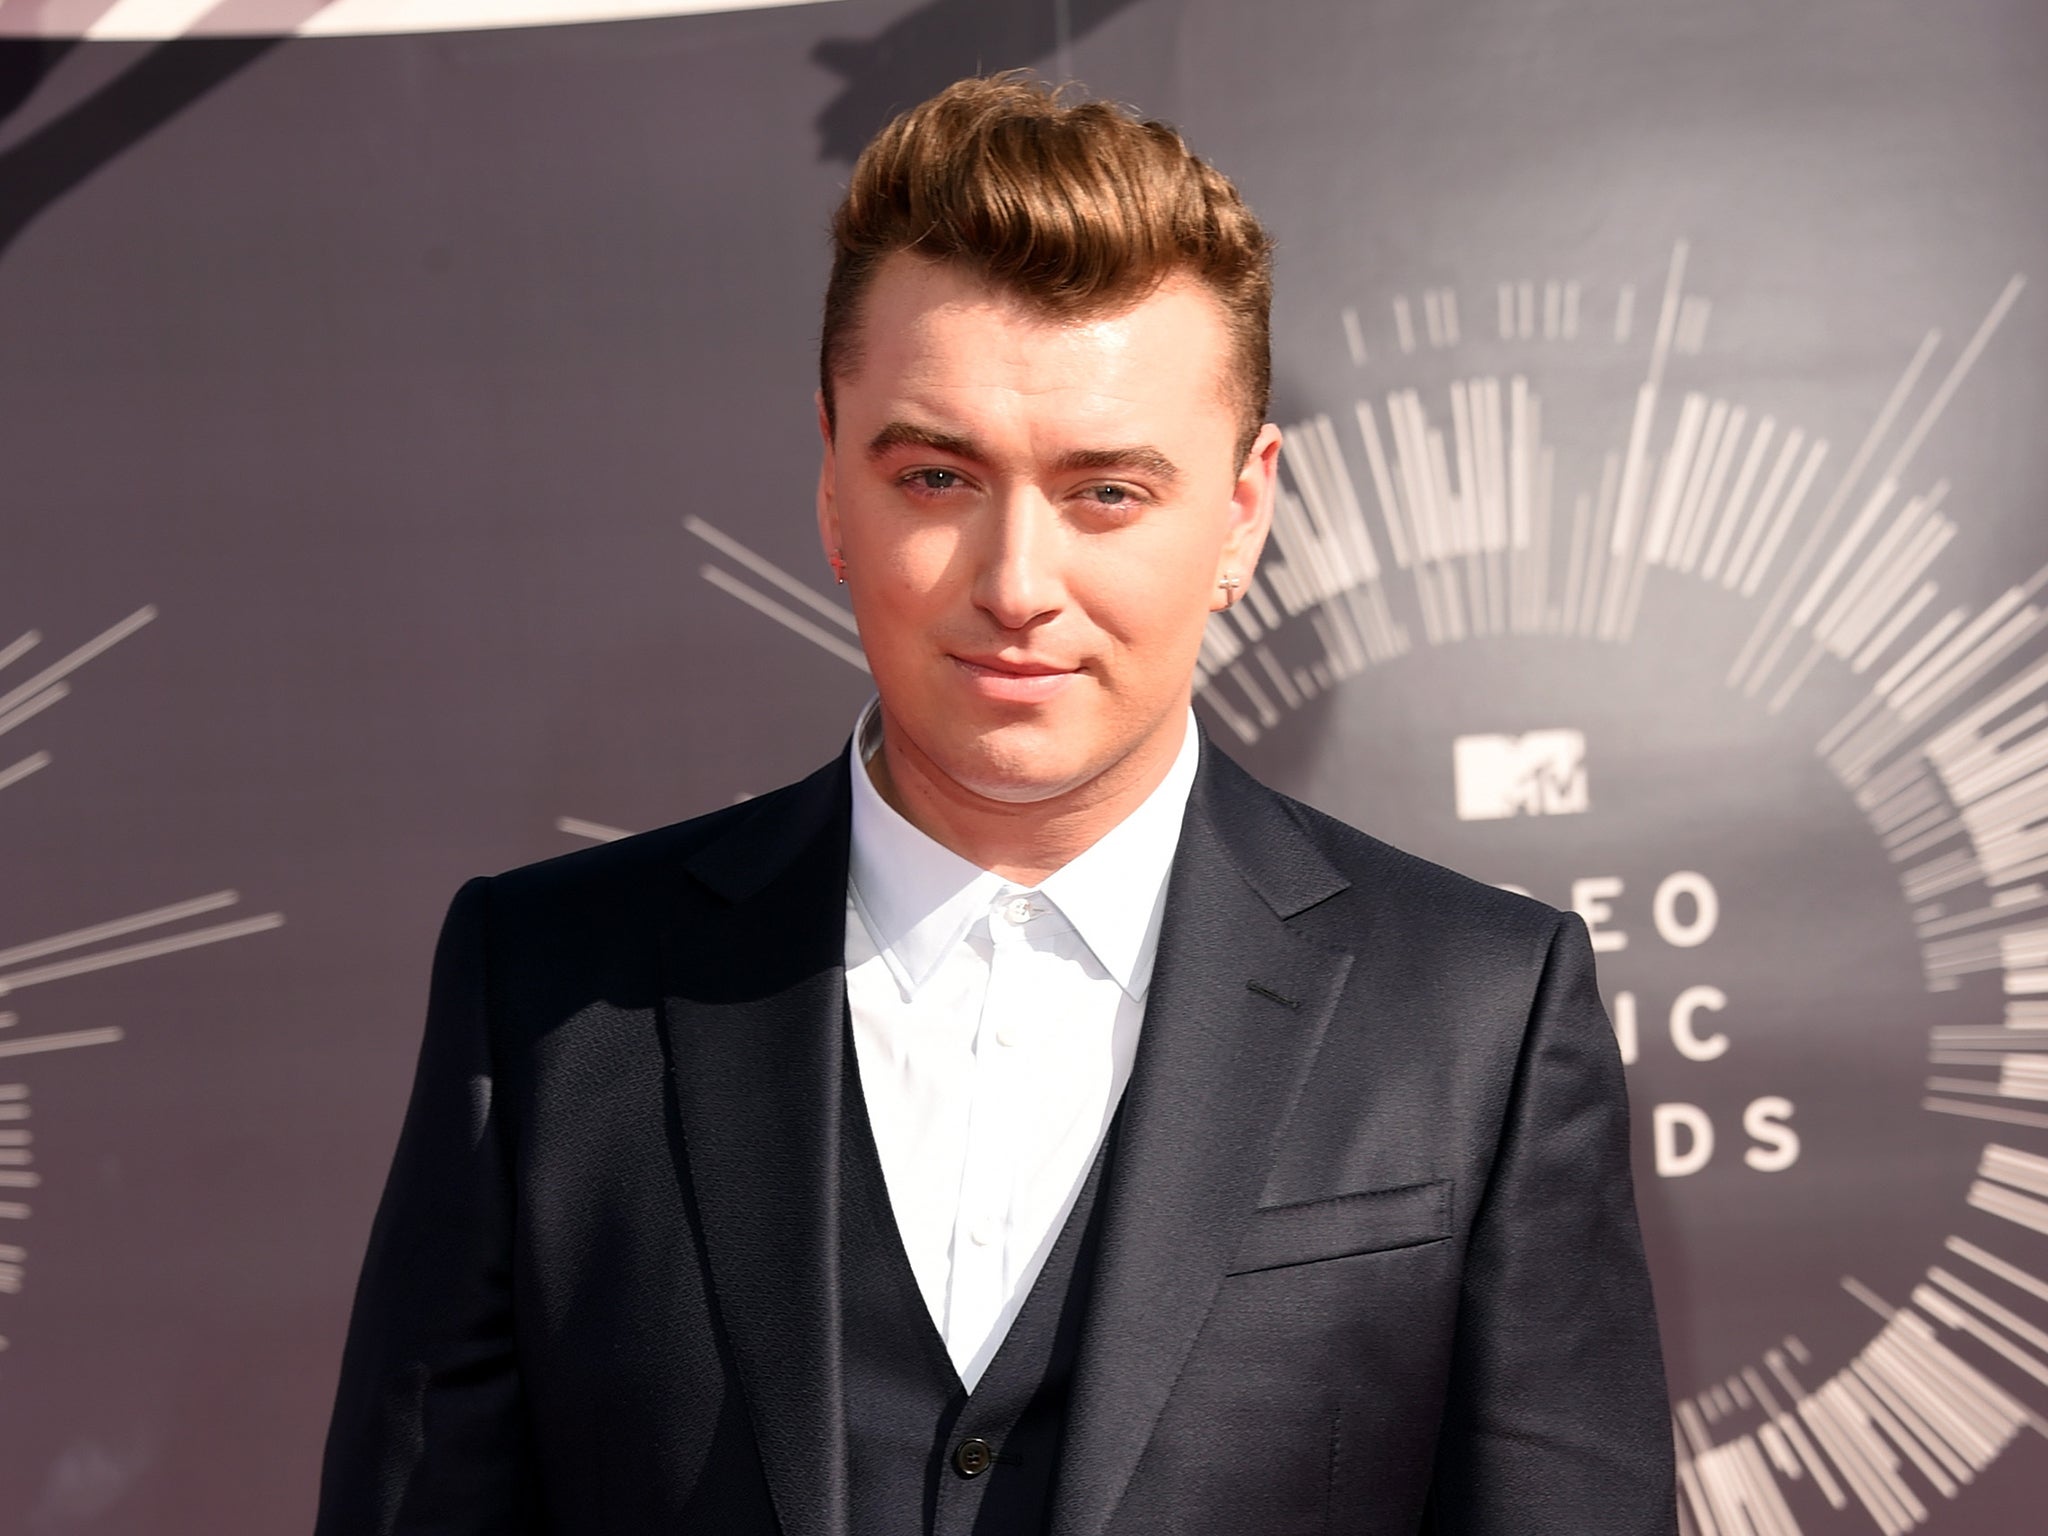 Sam Smith will tour the UK in March 2015